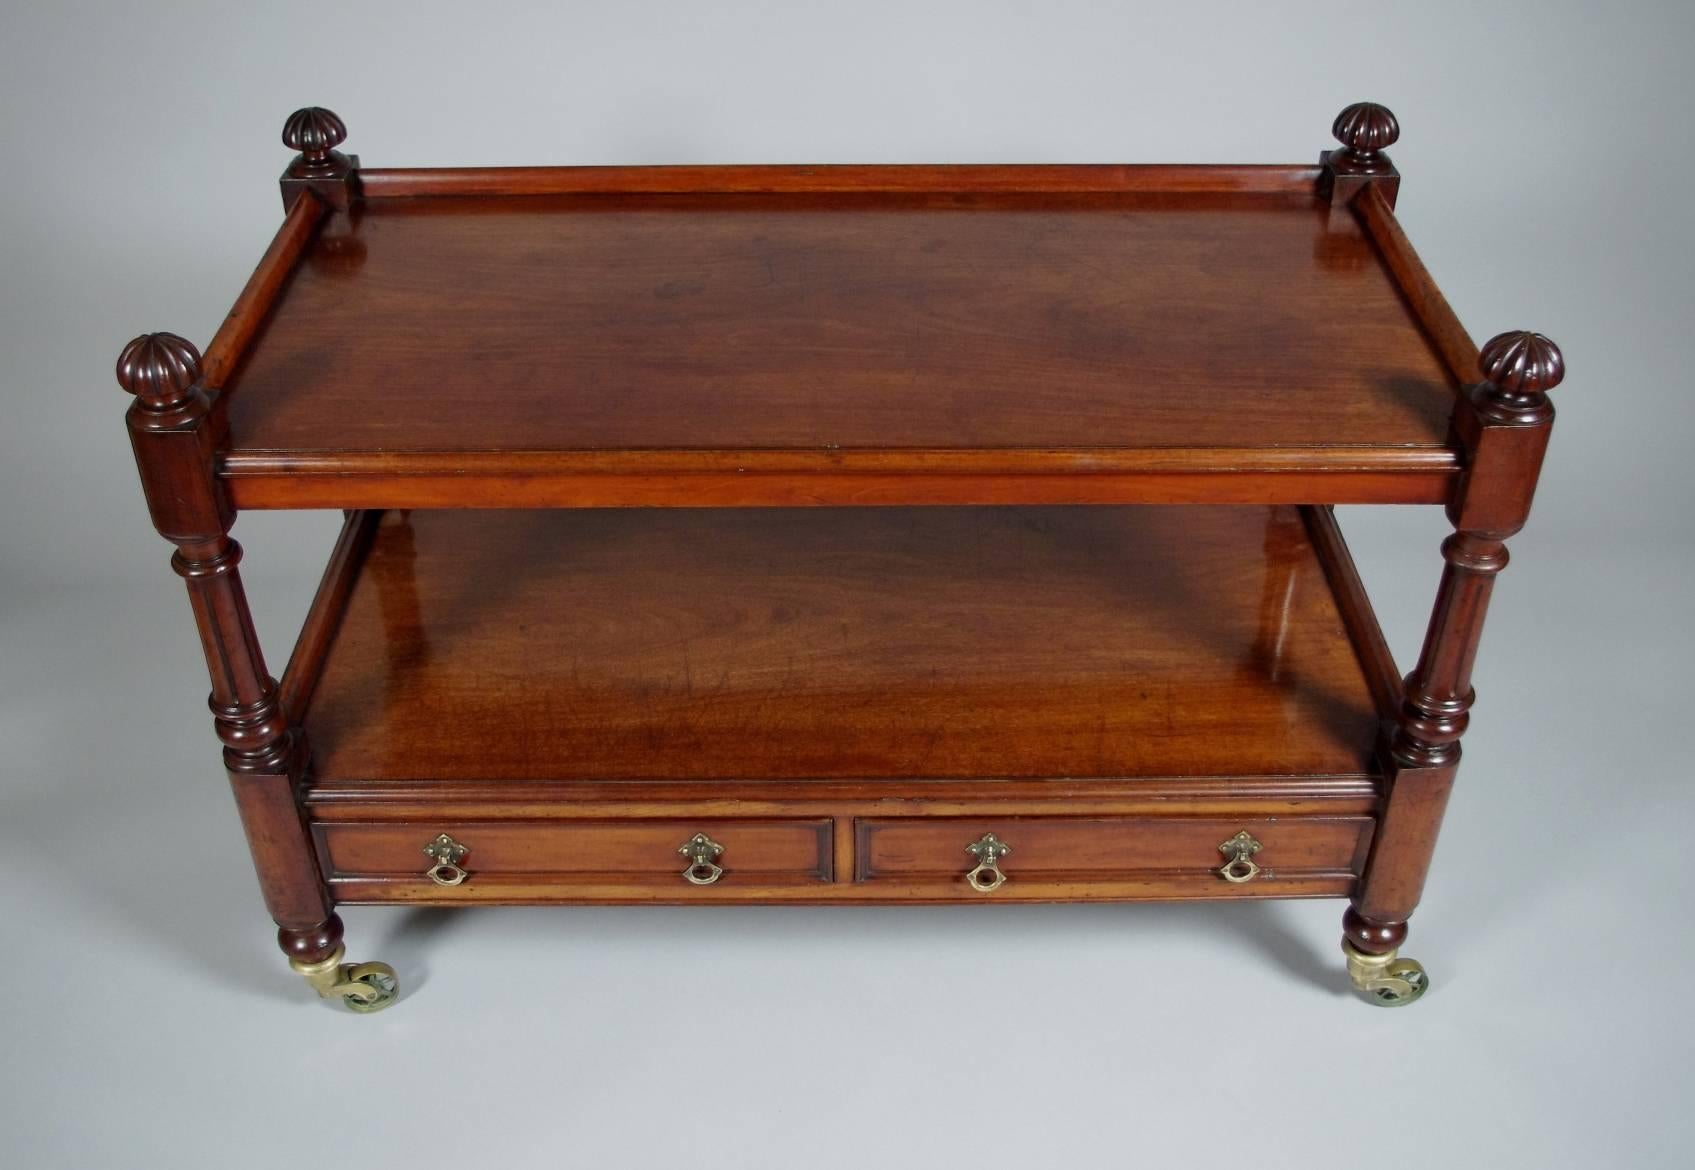 Victorian mahogany serving trolley, the two galleried shelves raised on fluted posts with large mushroom finials, the two drawers with dividers and original hardware, all on replaced brass casters.